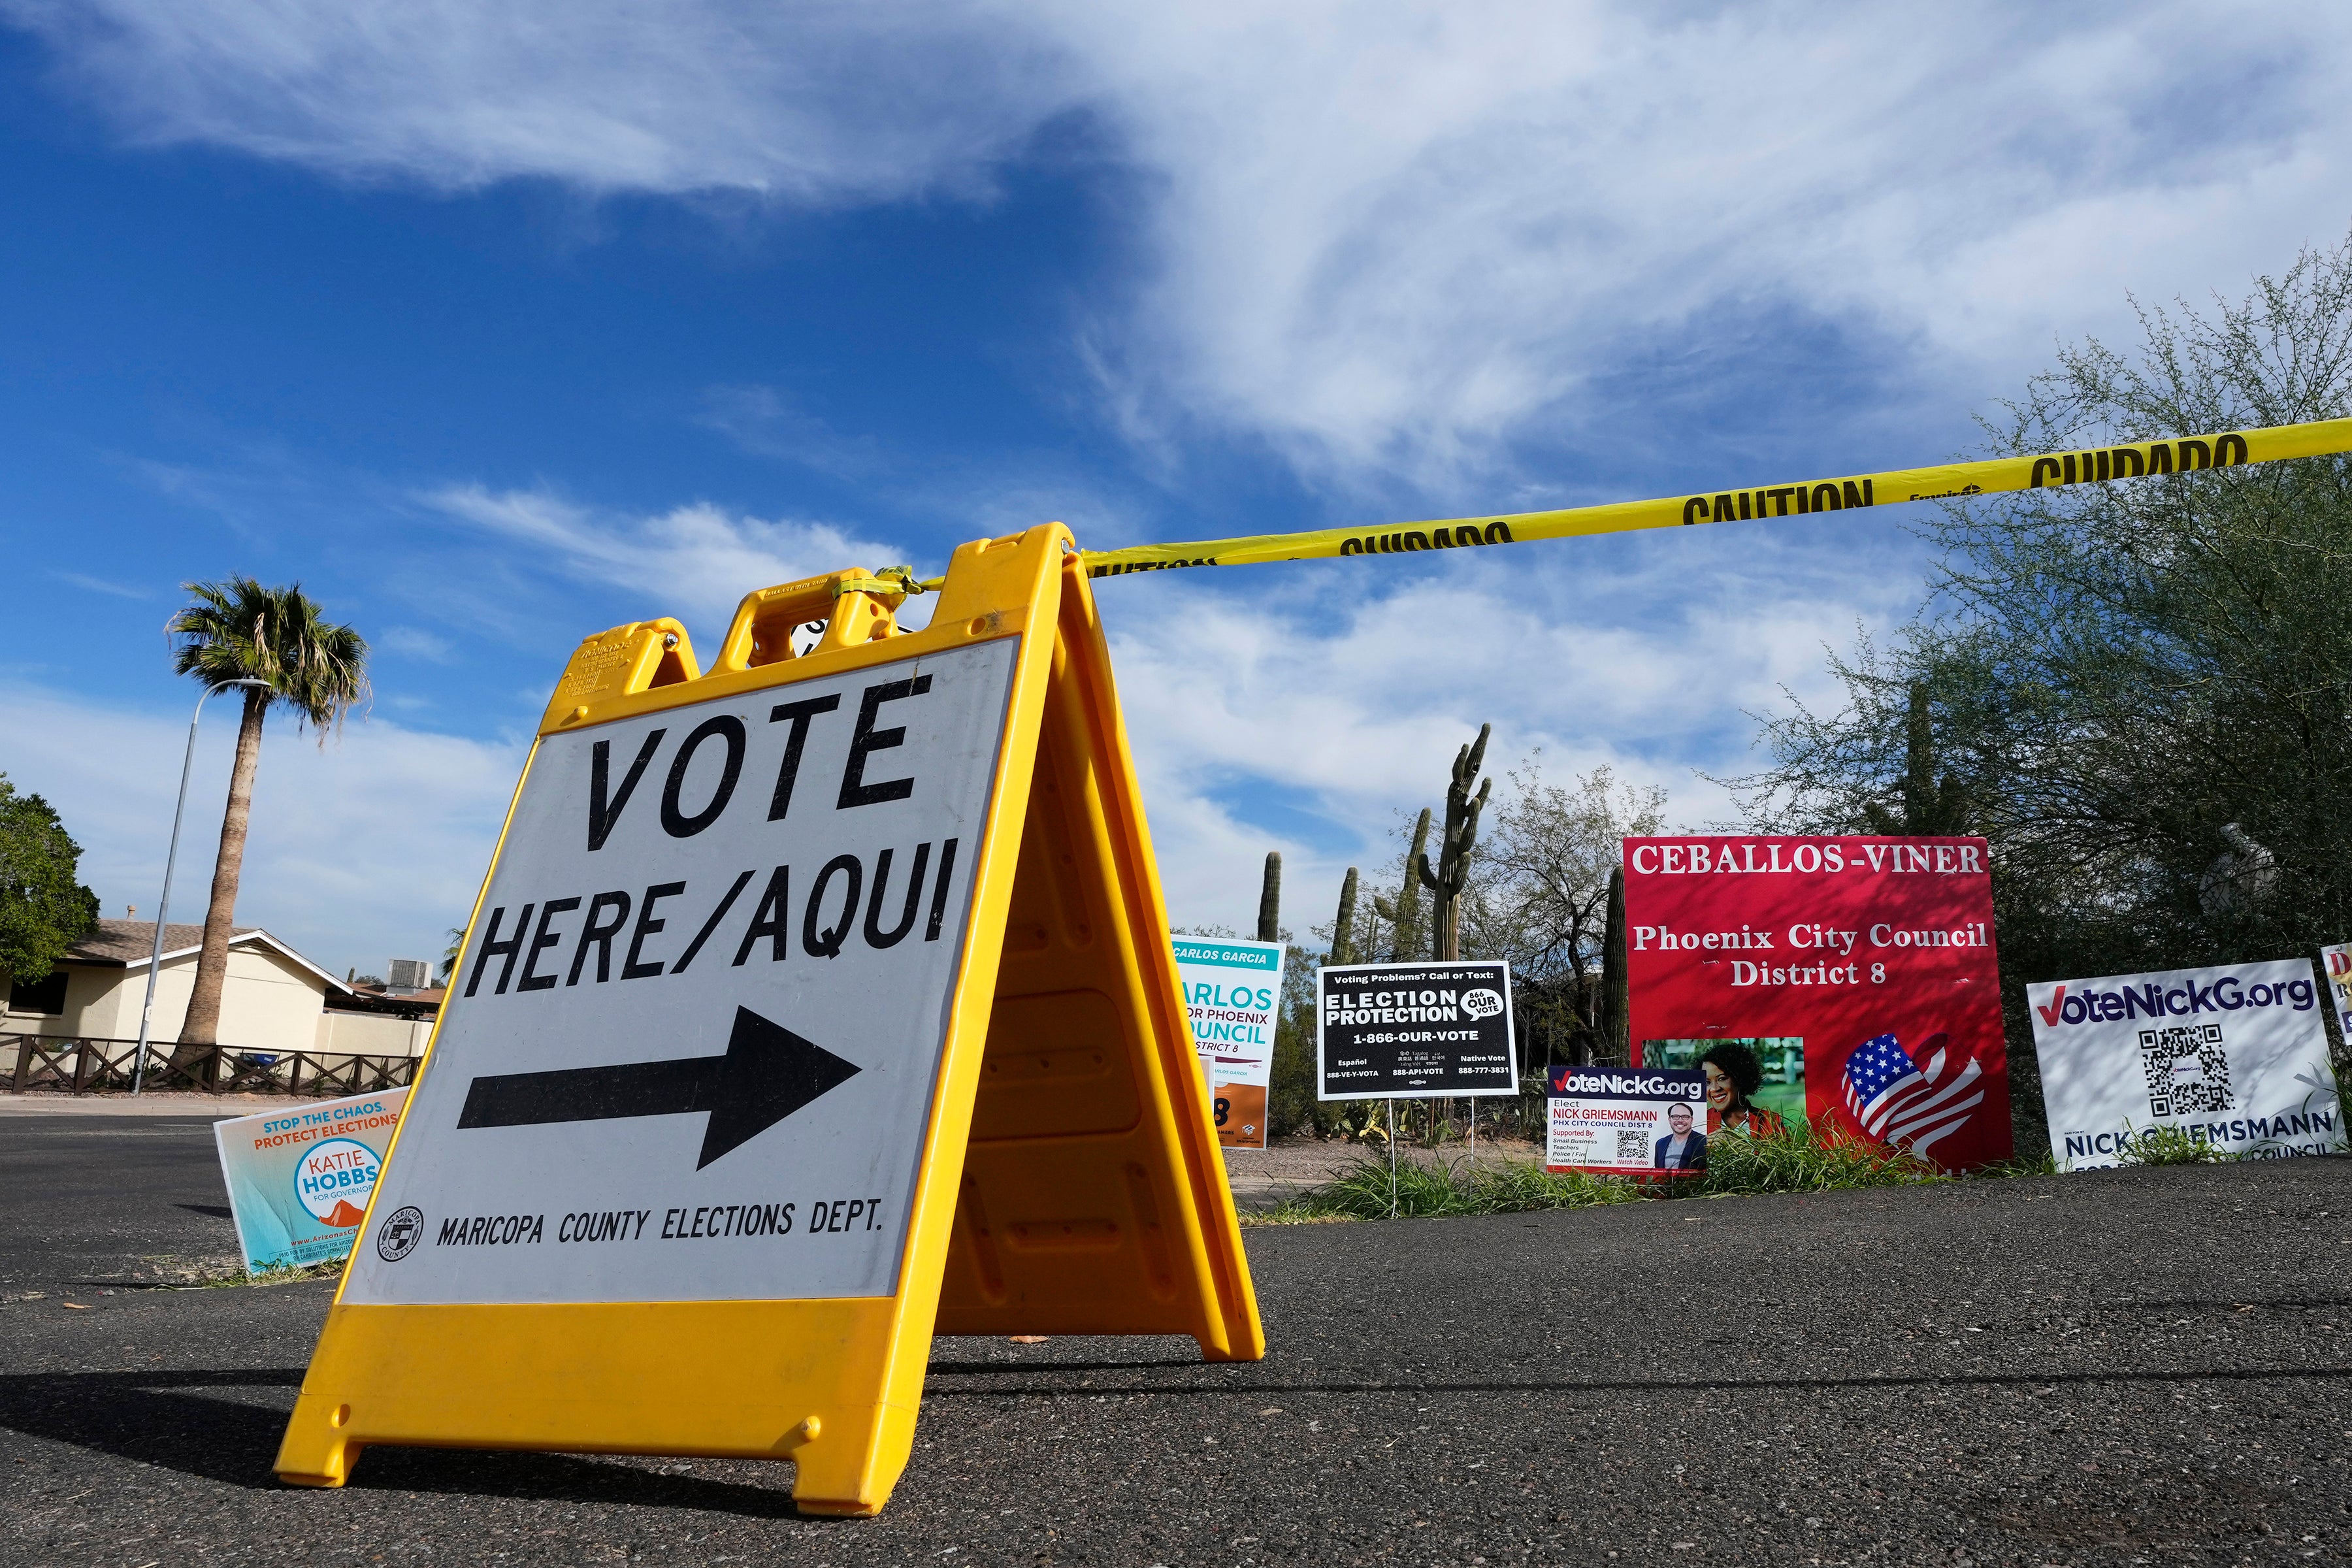 Election sign in Arizona, where ballot-counting delays were recently announced